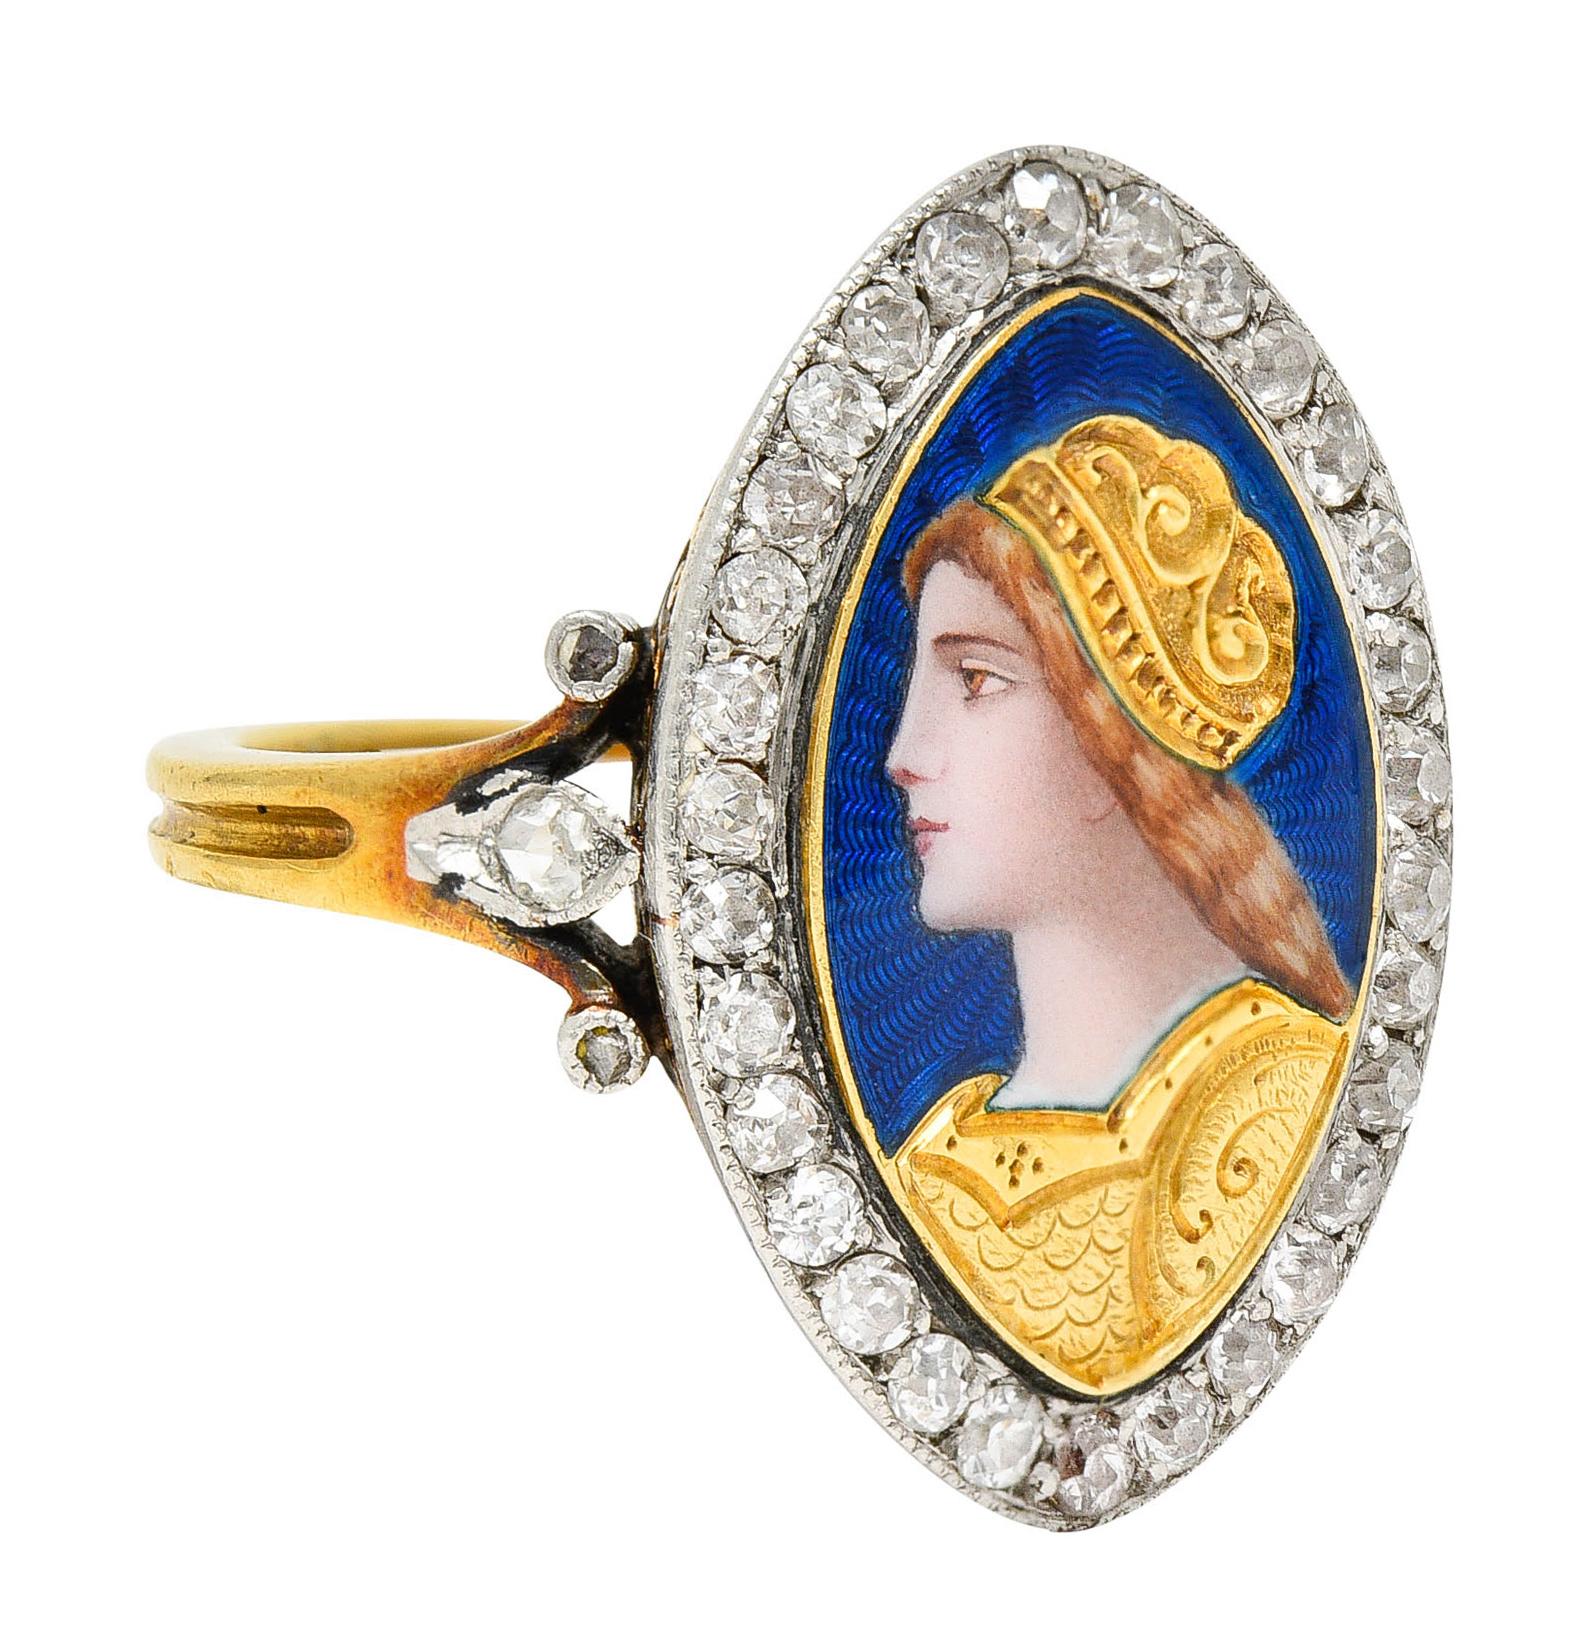 Navette shaped ring depicts a refined enamel portrait of a Renaissance woman

With deeply engraved gold garments and a radiating guilloche enamel background - bright ultramarine blue

Surrounded by old single cut diamonds bead set in platinum with a